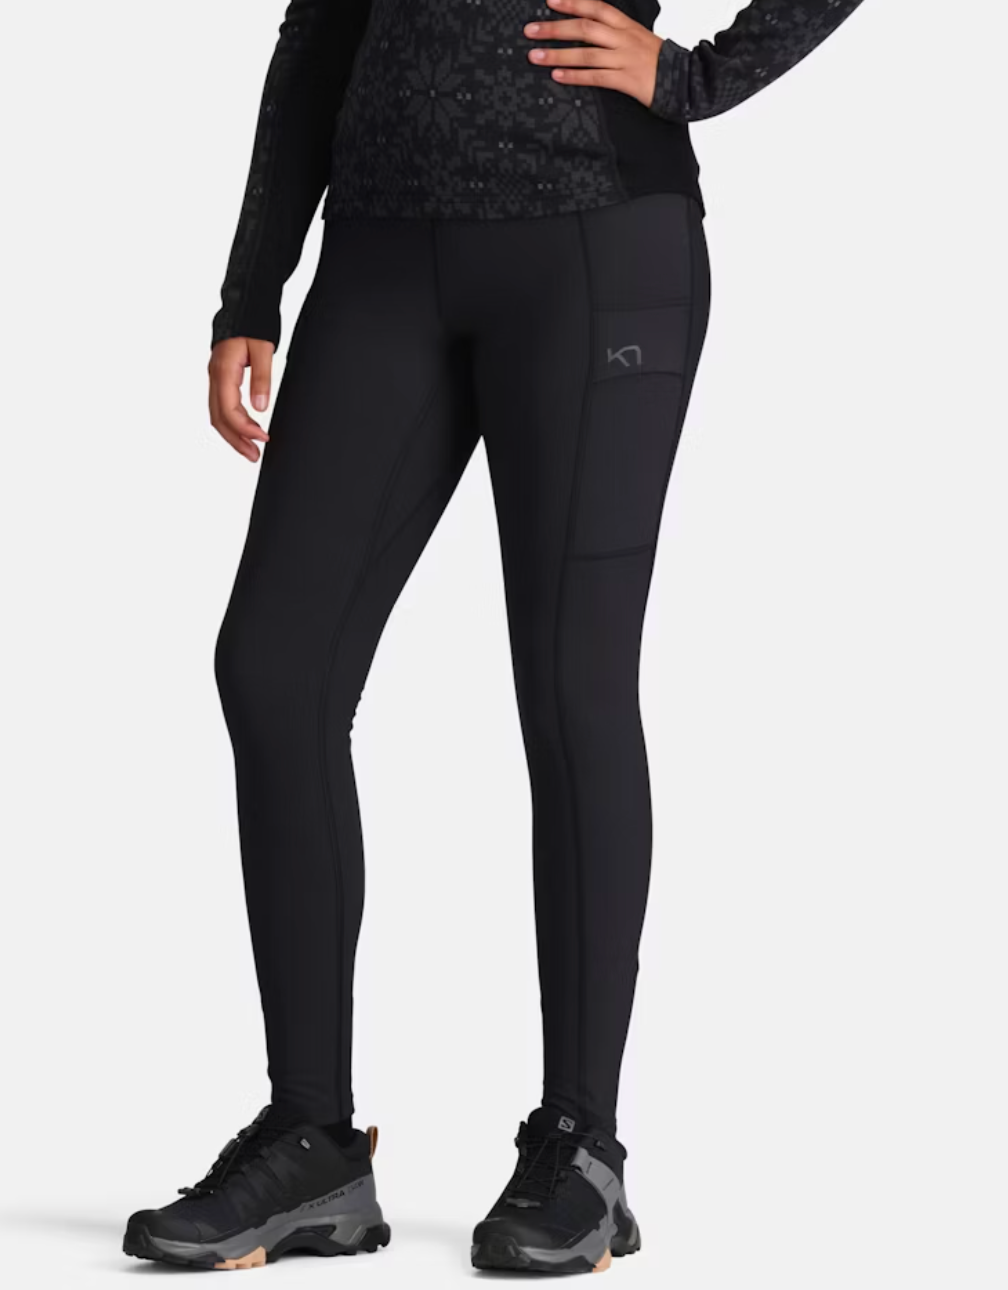 Women's Ruth Thermal Tights